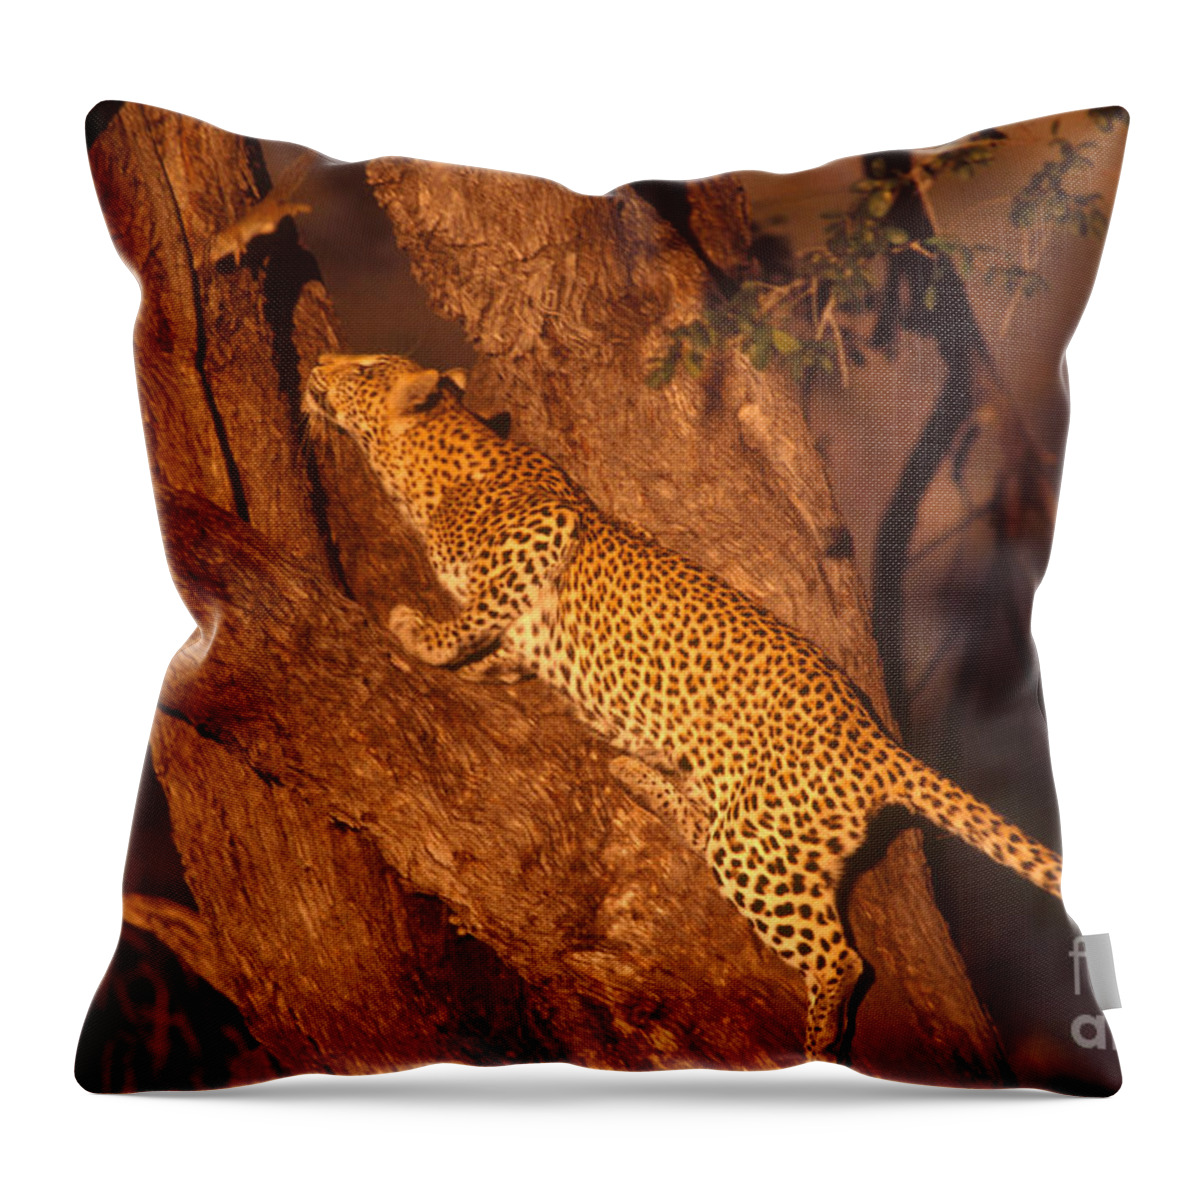 Nature Throw Pillow featuring the photograph Leopard Chasing Tree Squirrel by Gregory G Dimijian